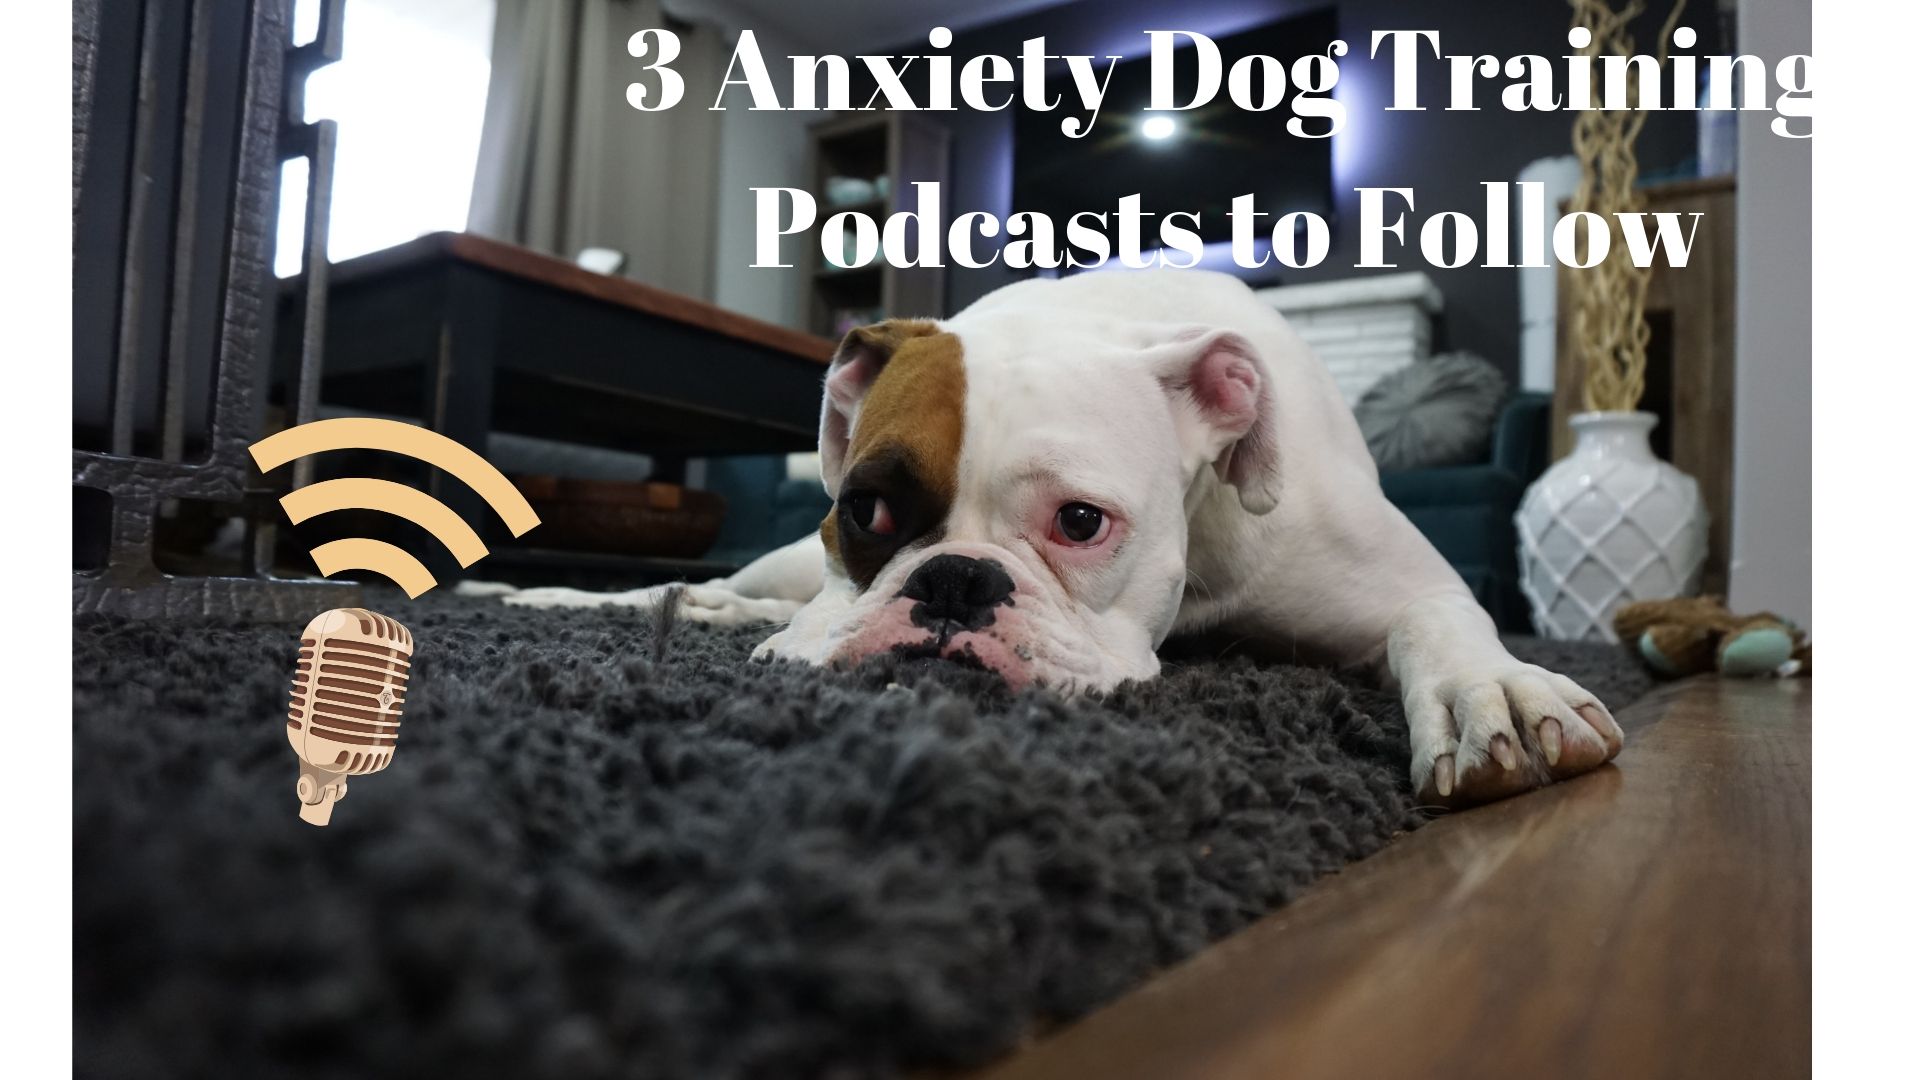 Anxiety Dog Training Podcasts